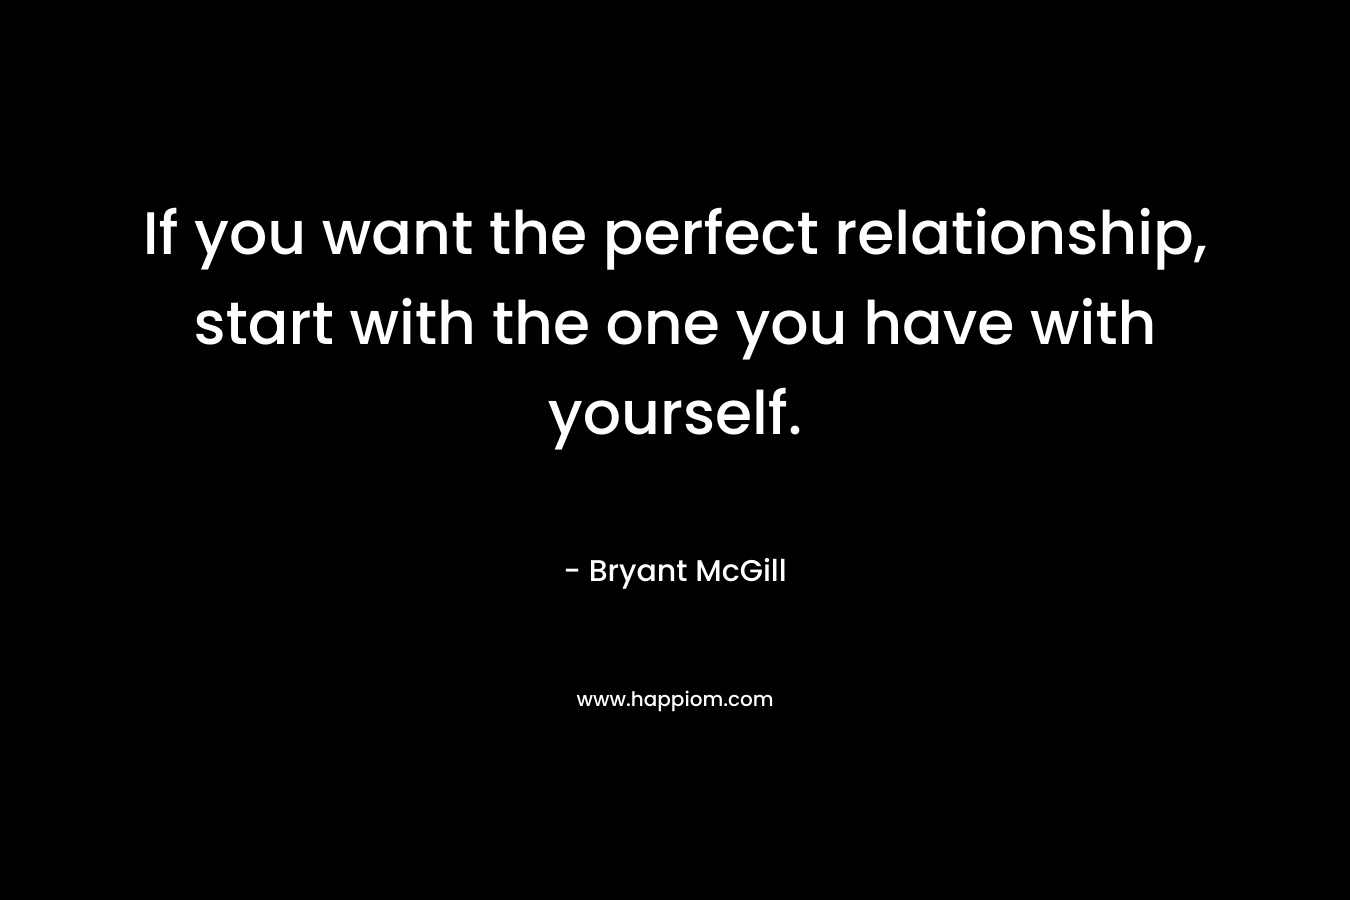 If you want the perfect relationship, start with the one you have with yourself. – Bryant McGill